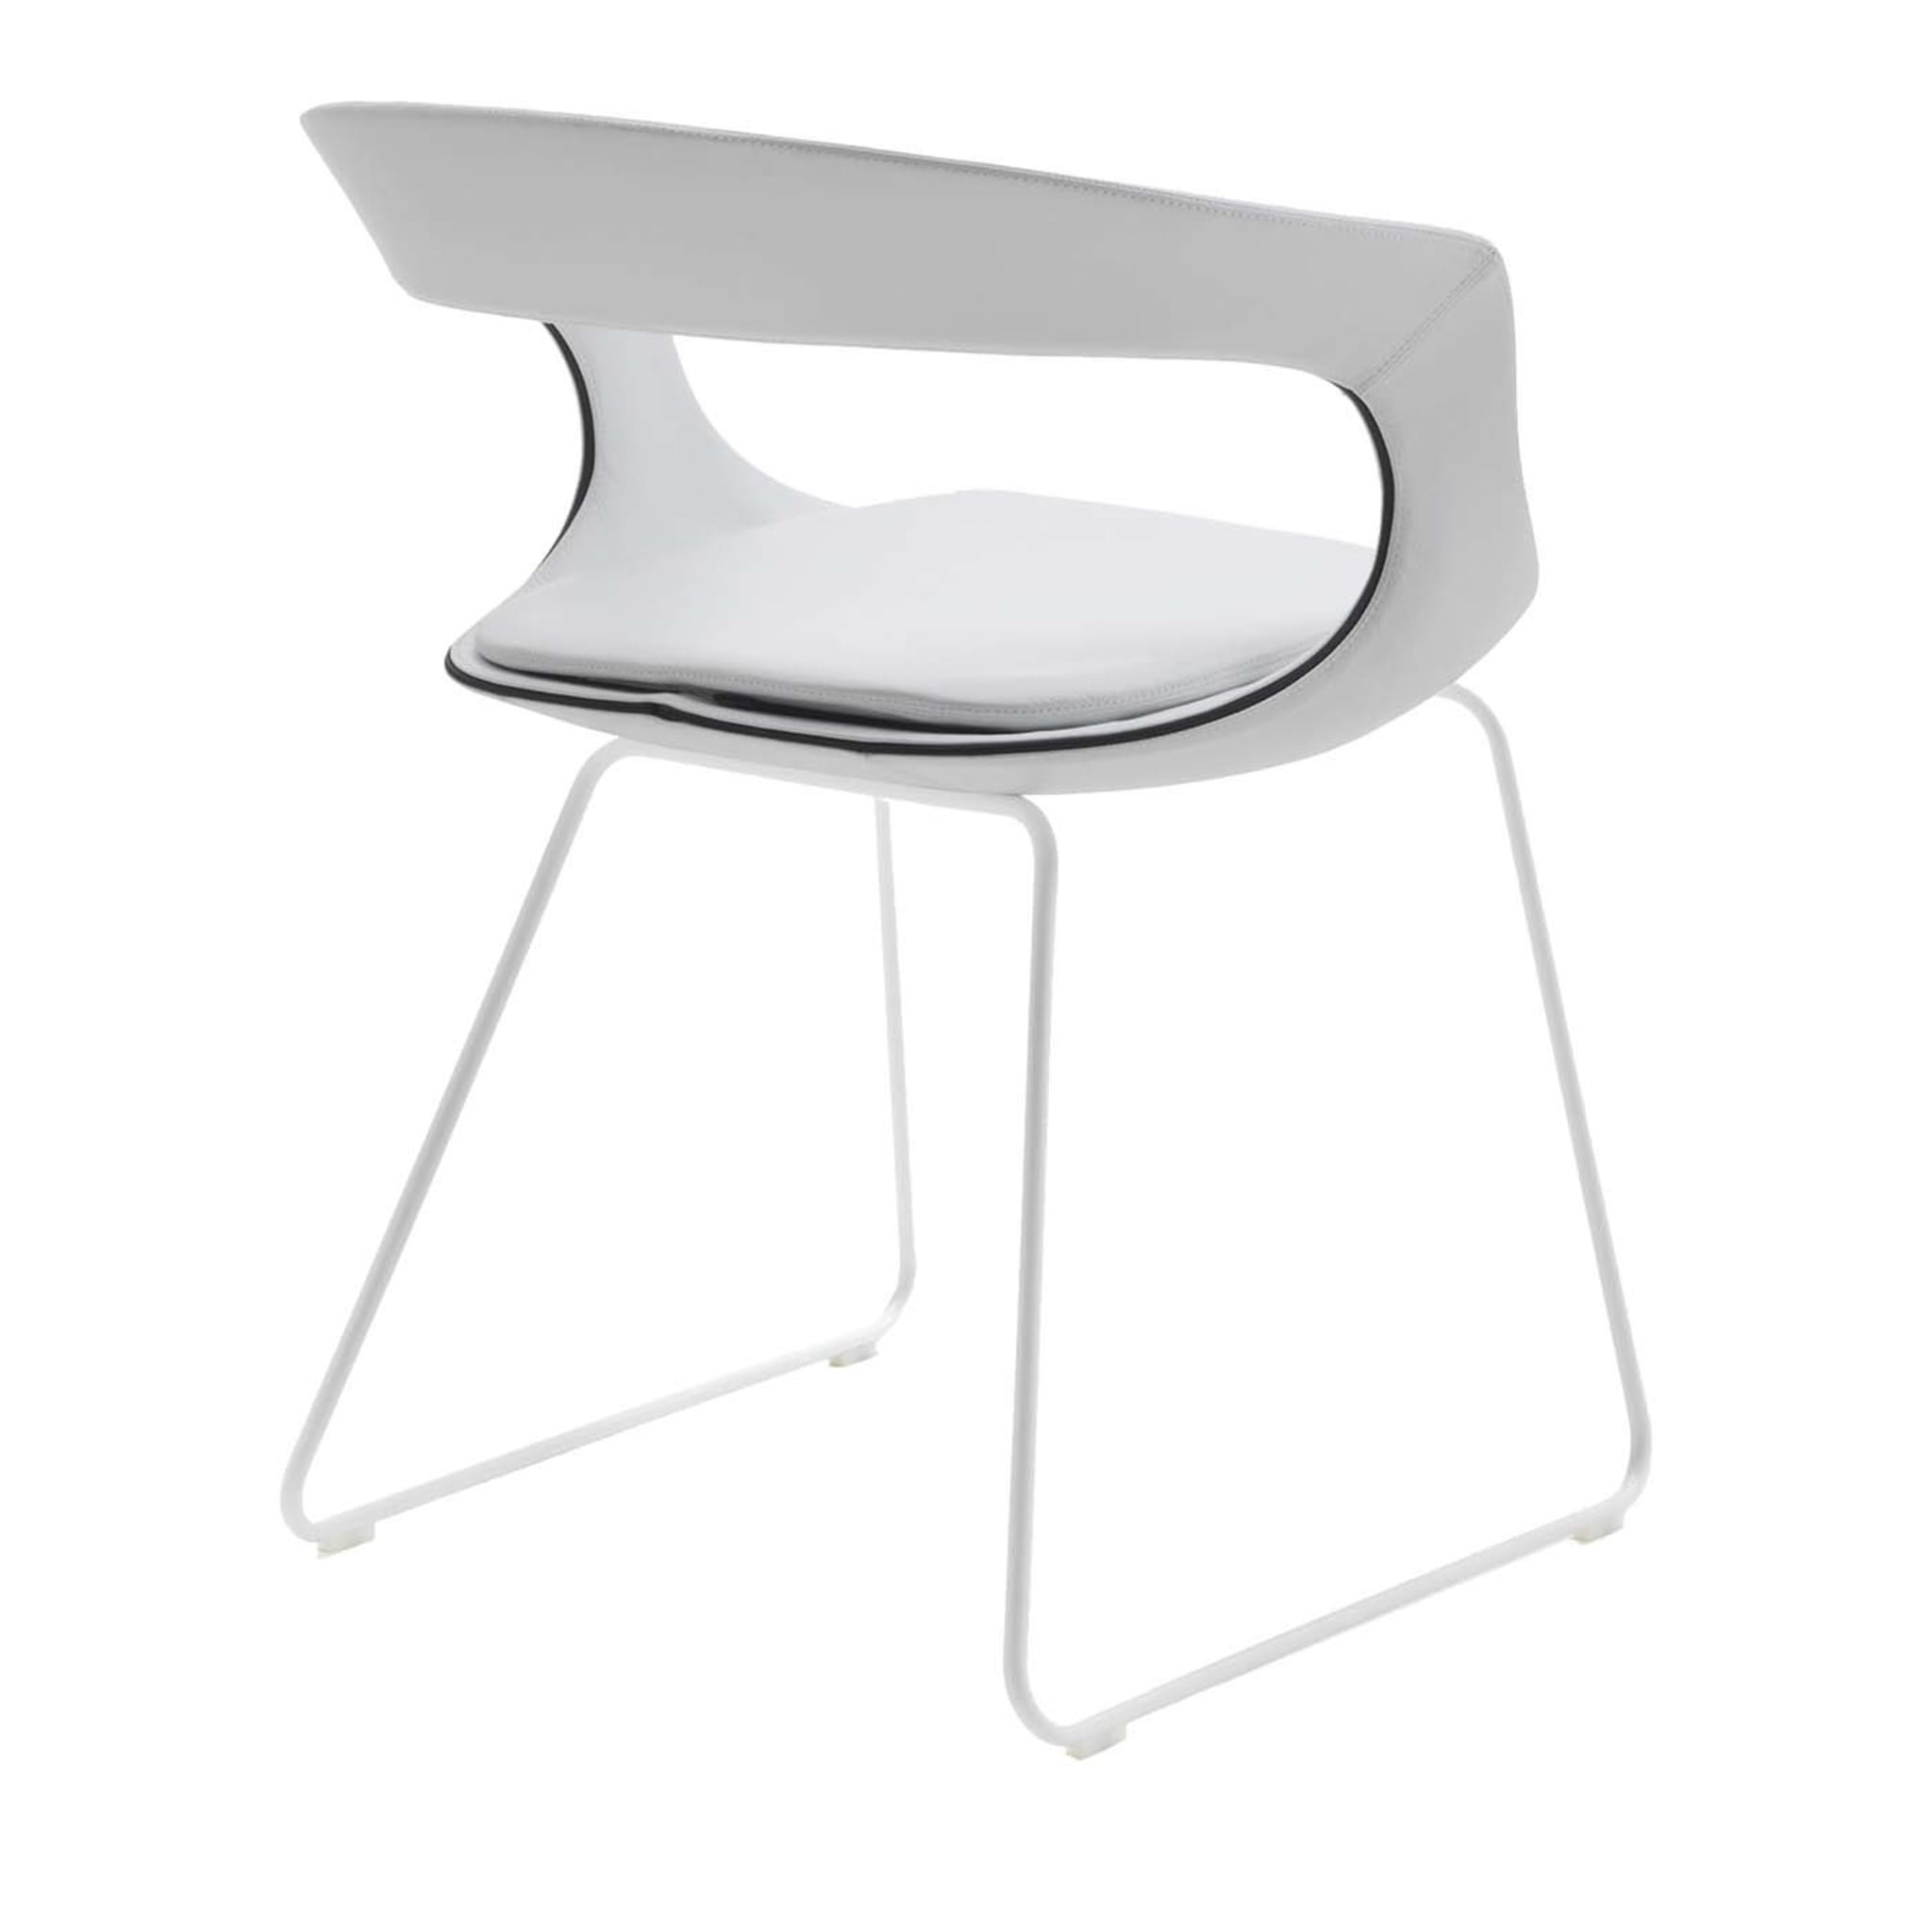 Frenchkiss Low-Backed Sled-Base Chair by Stefano Bigi - Main view